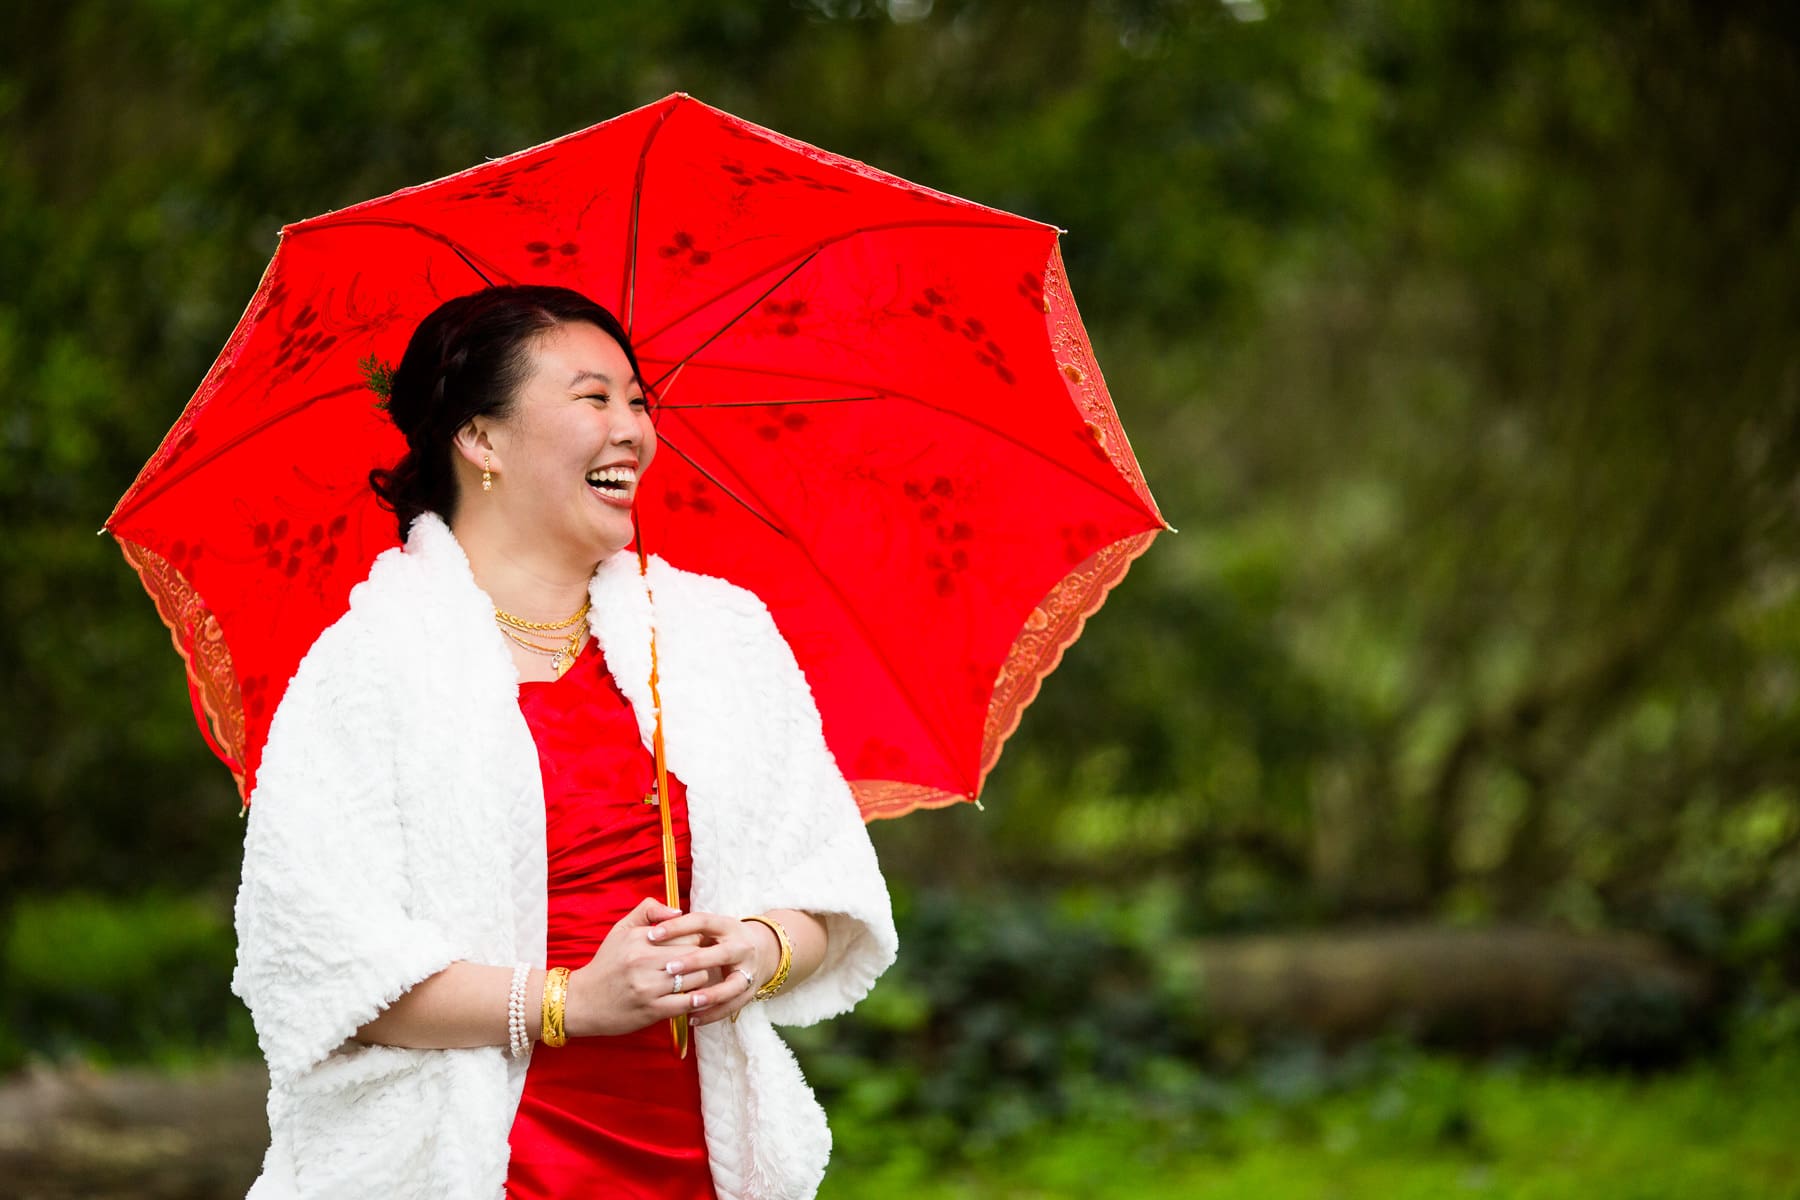 Bride in red dress with red umbrella laughing